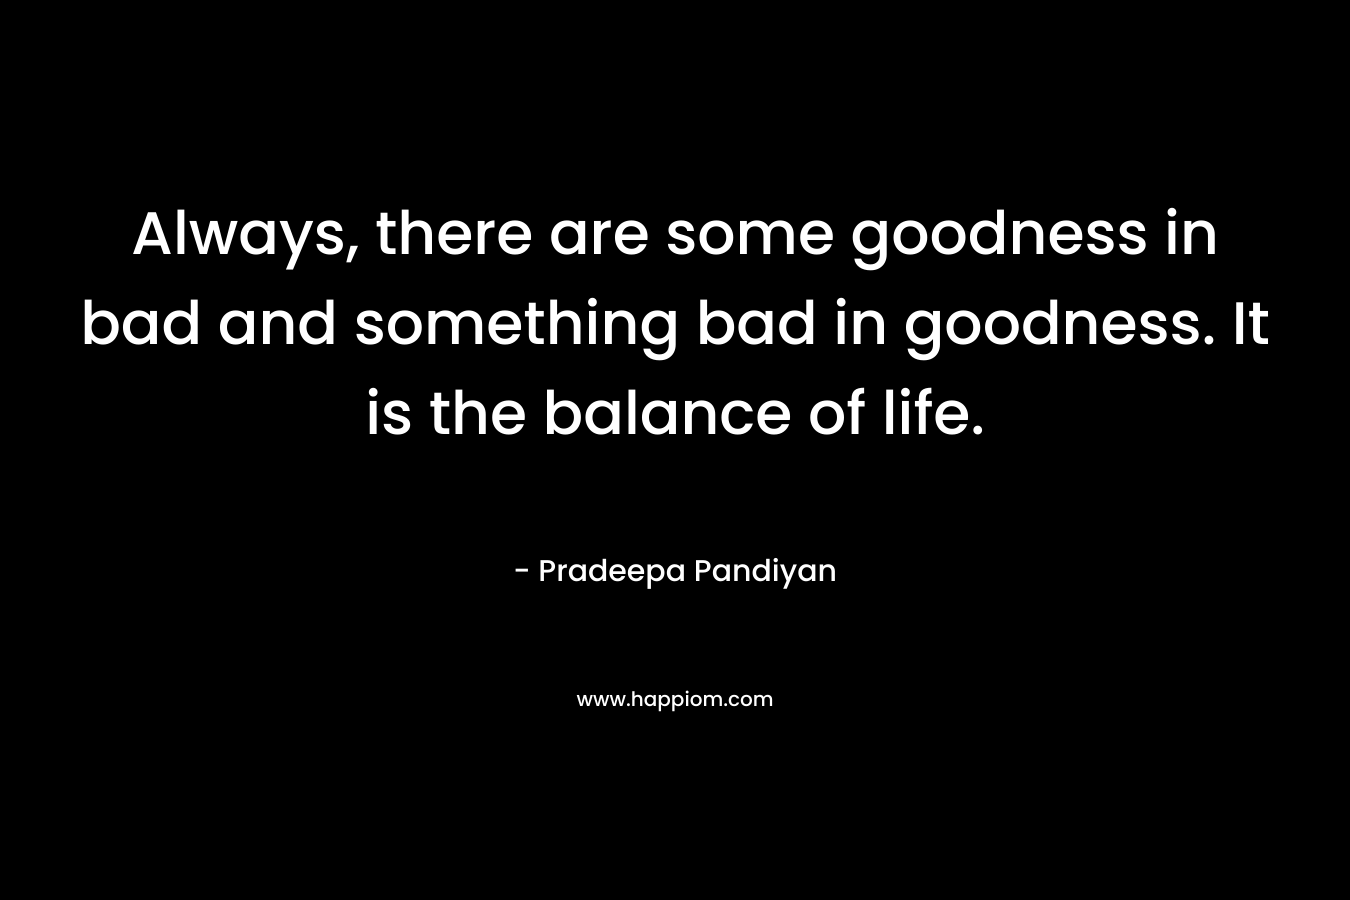 Always, there are some goodness in bad and something bad in goodness. It is the balance of life.